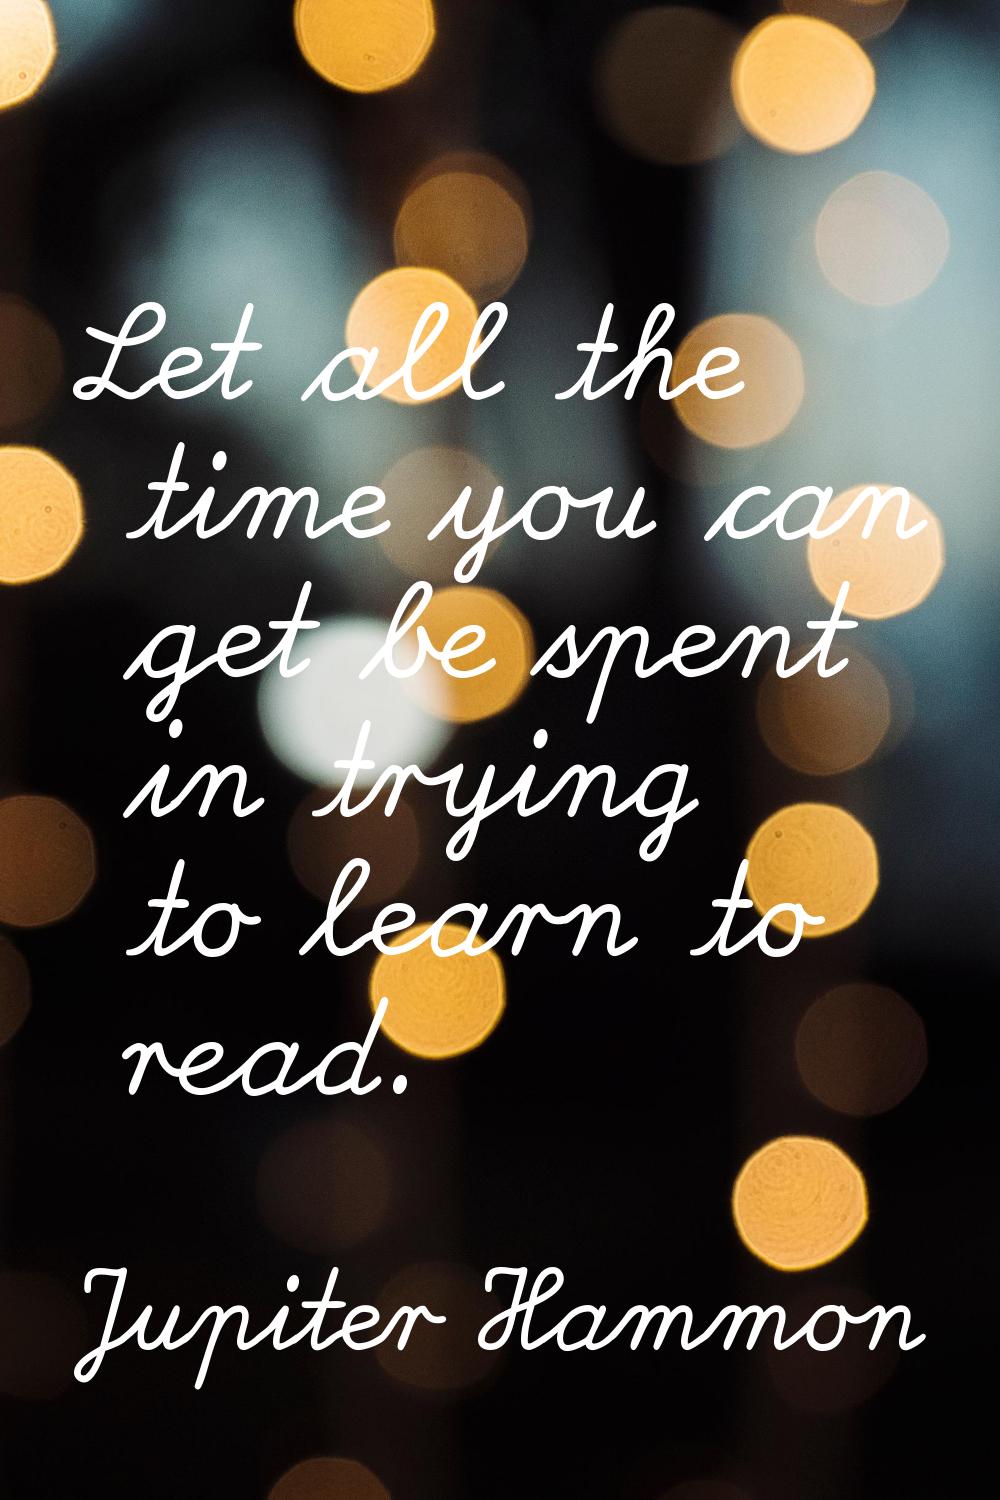 Let all the time you can get be spent in trying to learn to read.